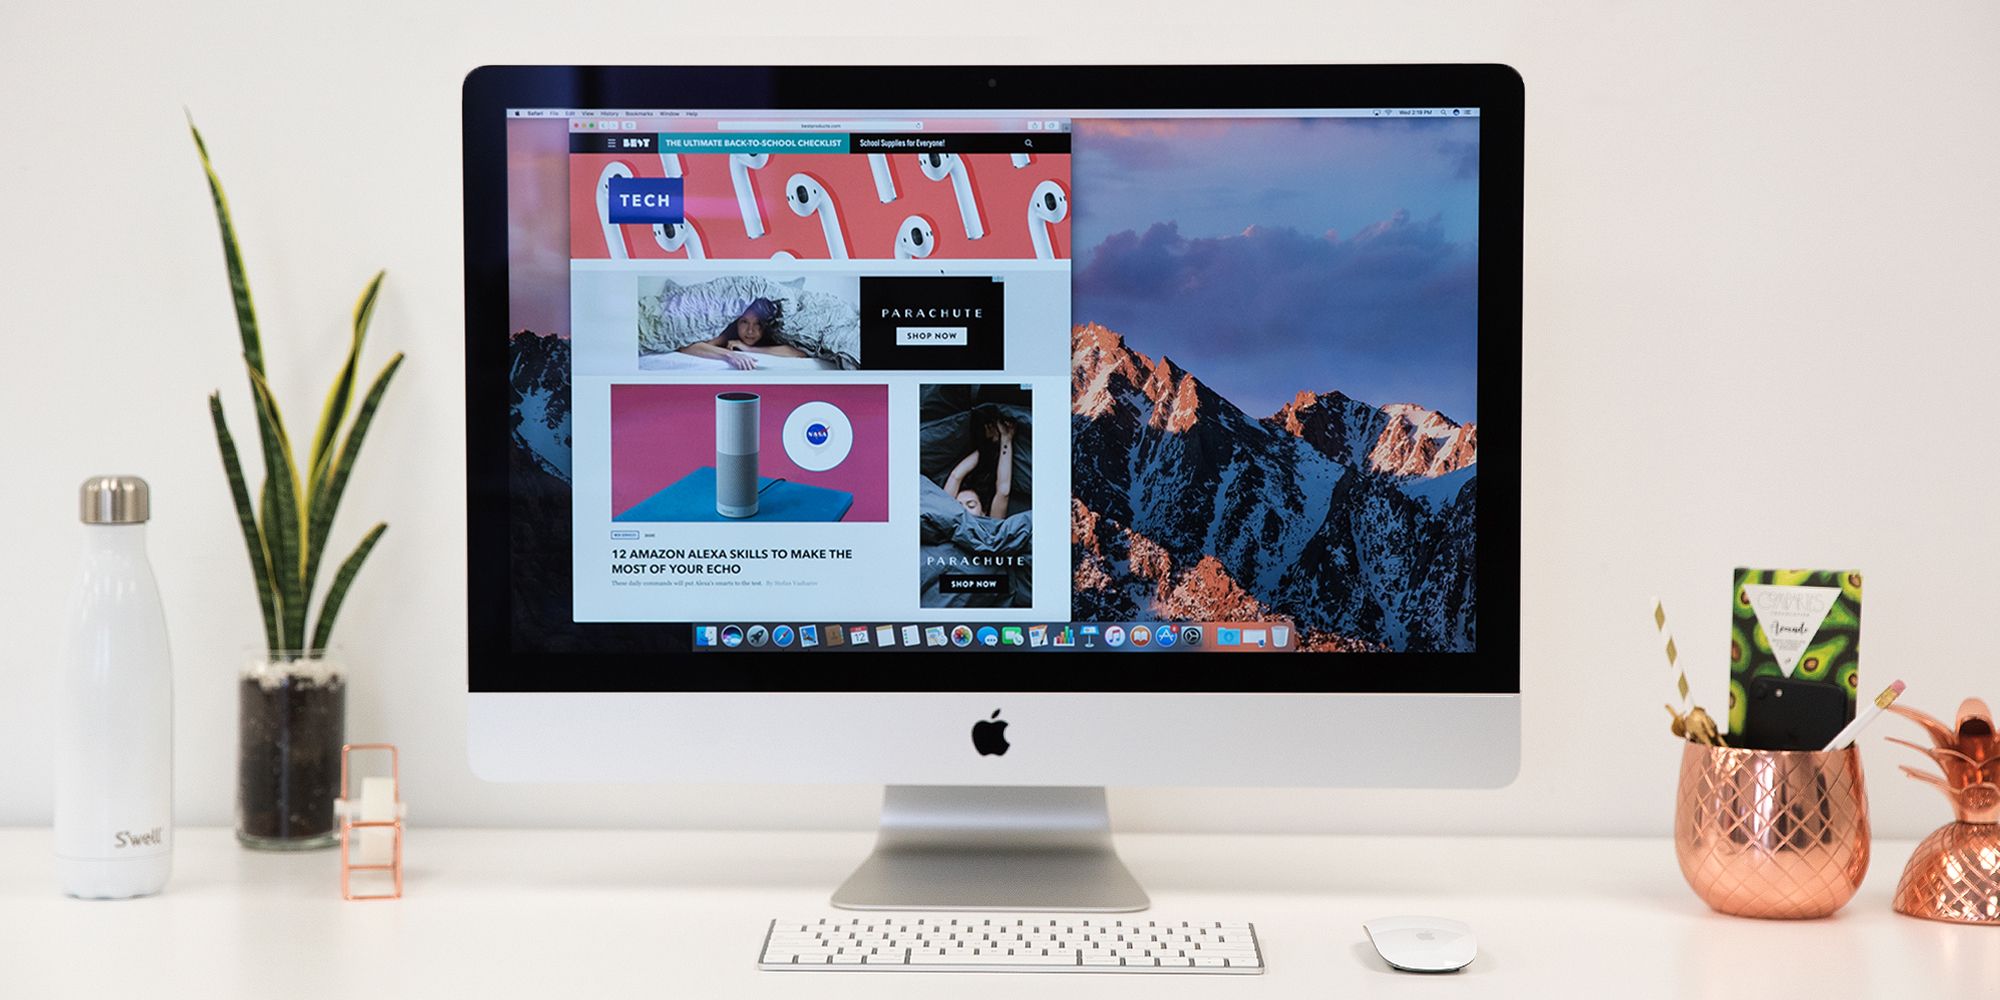 iMac 27-Inch With 5K Retina Review 2018 - Rating Apple's New iMac